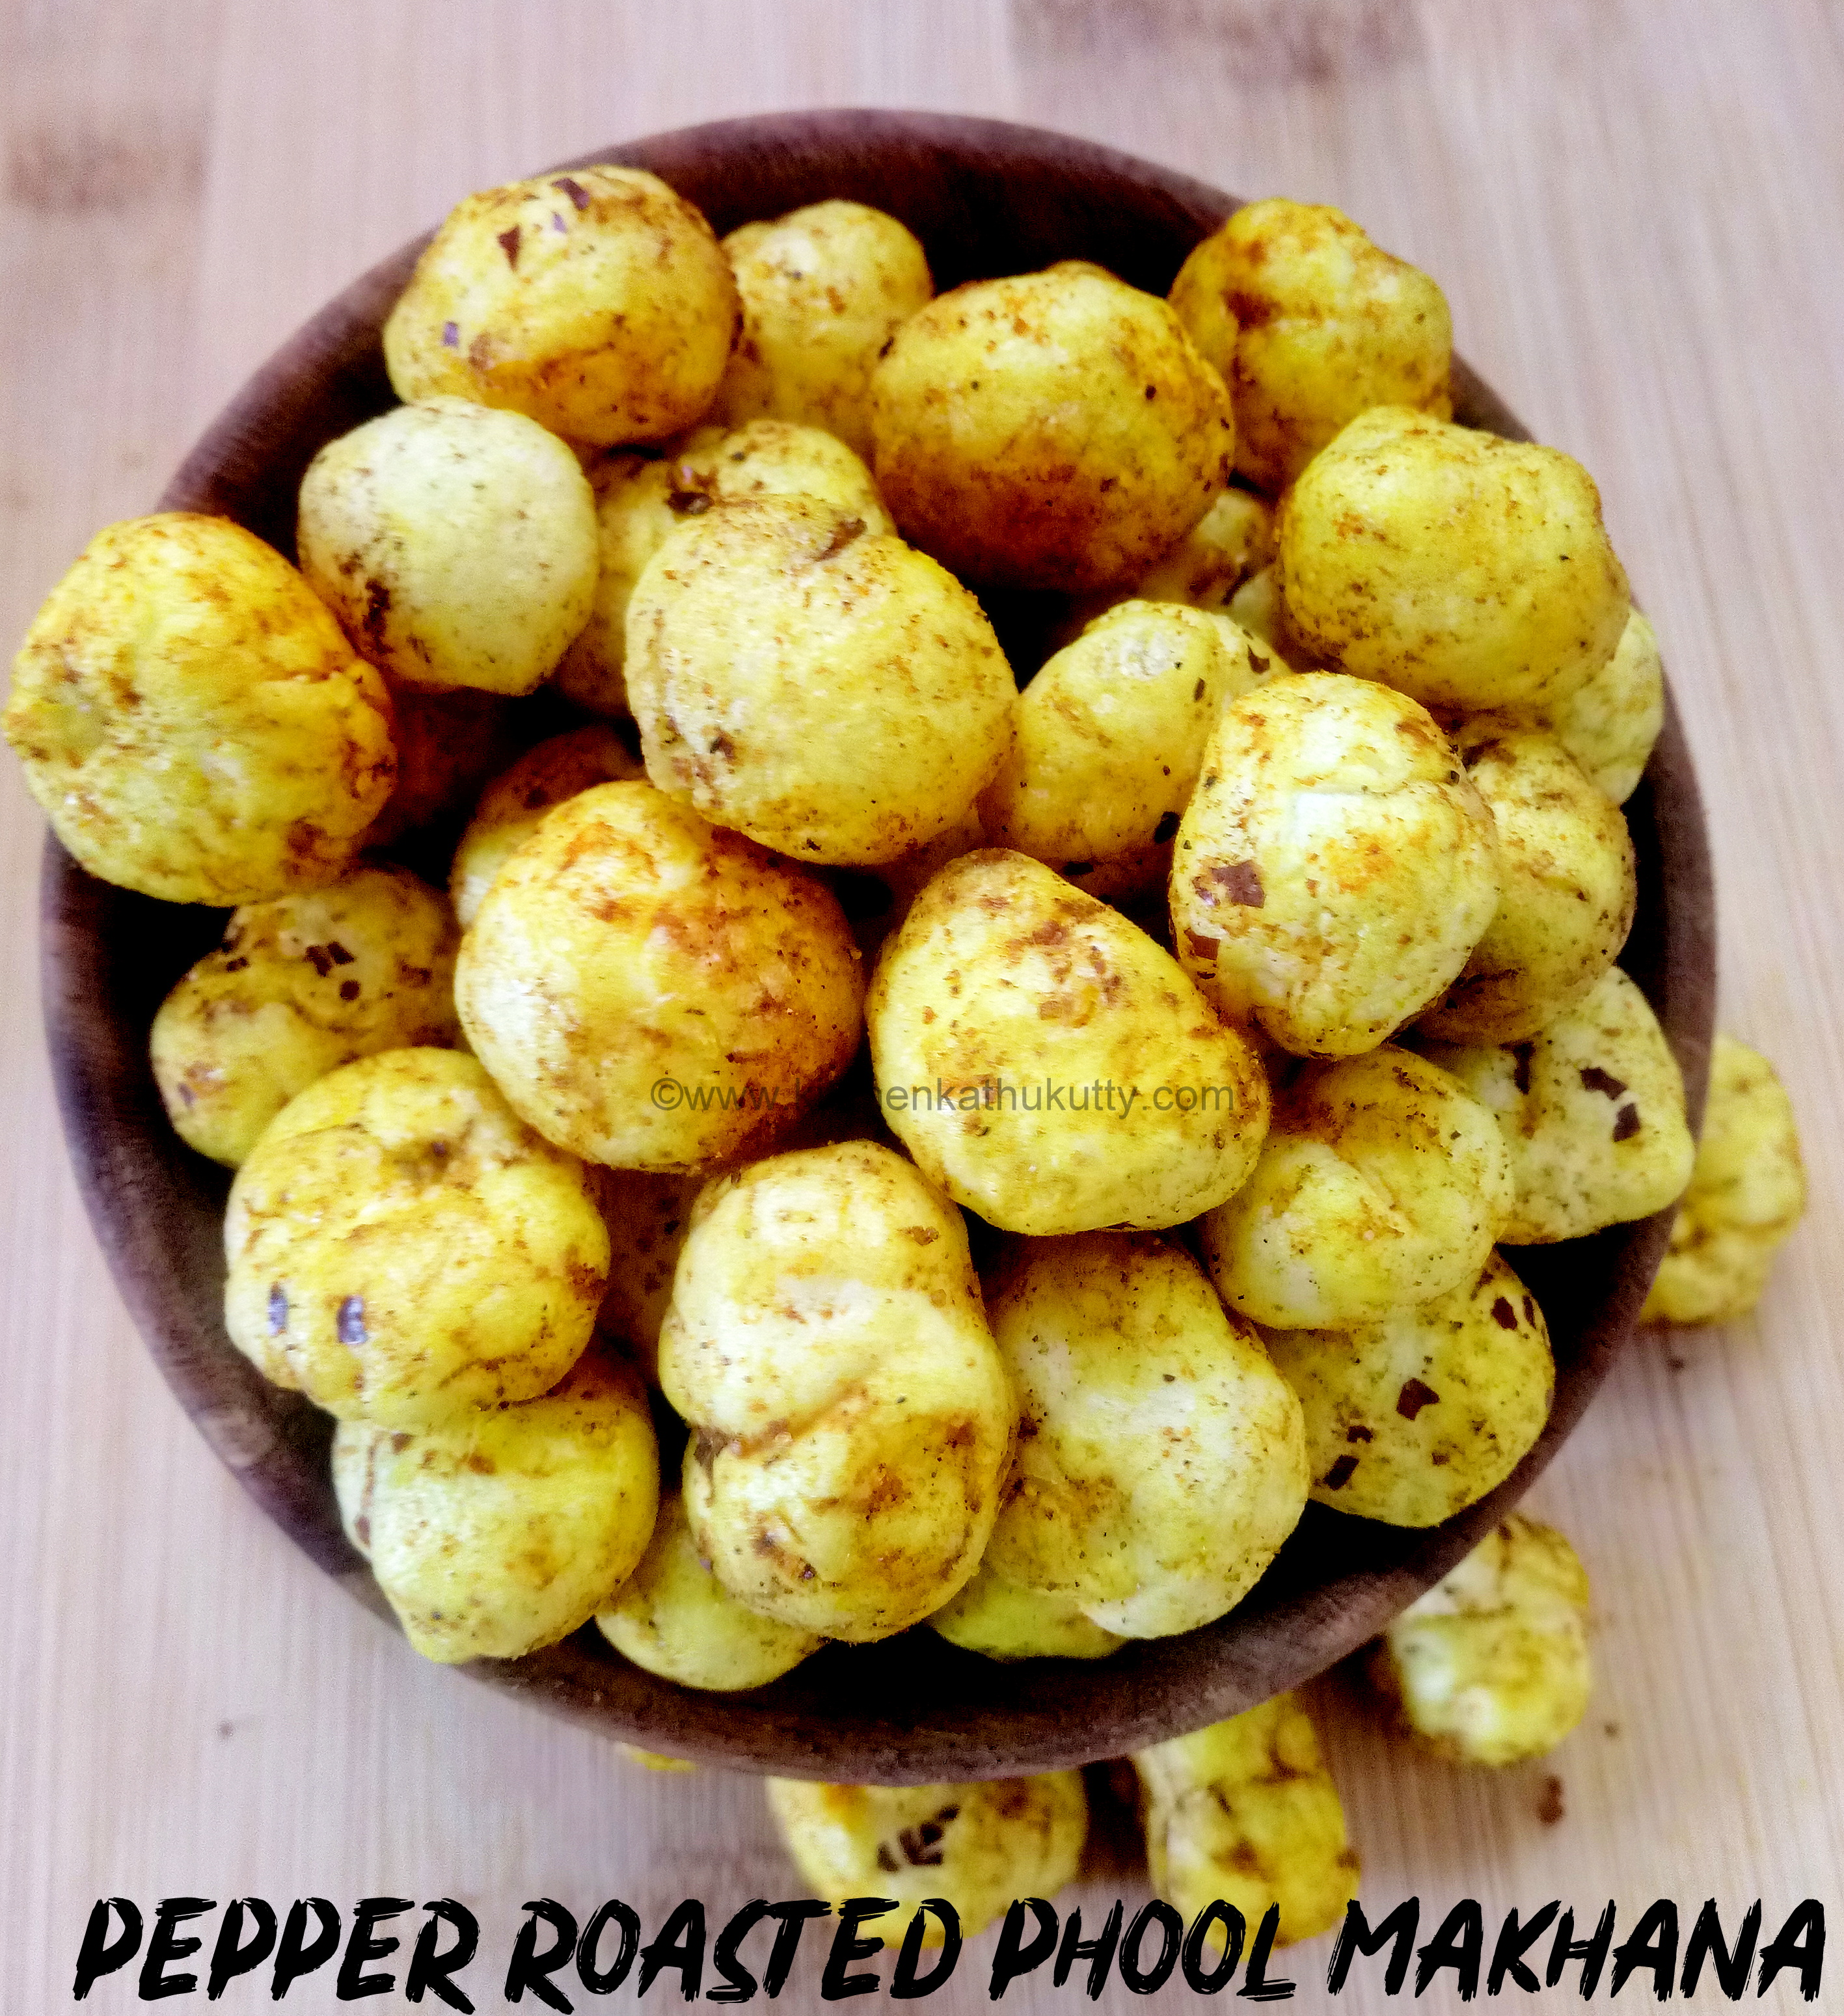 roasted makhana recipe for babies,toddlers and kids